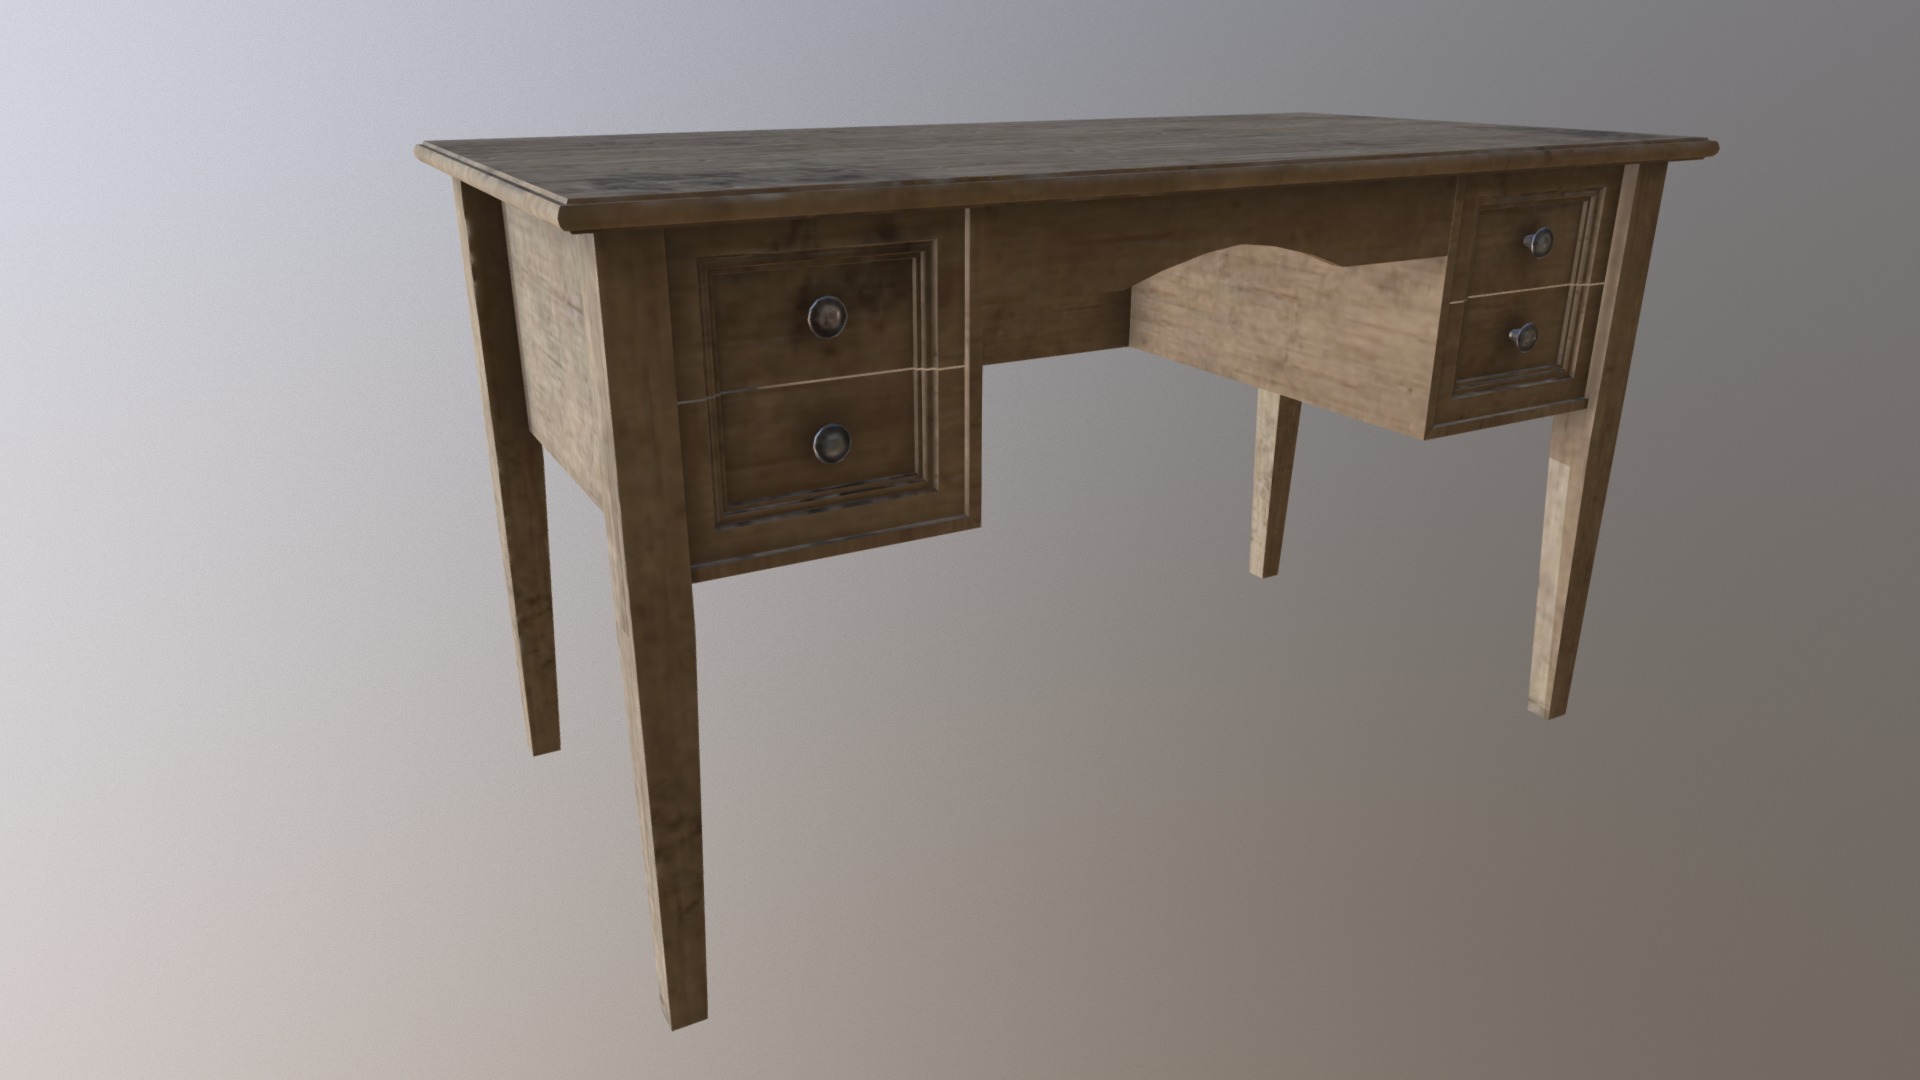 3D model Old table - This is a 3D model of the Old table. The 3D model is about a wooden table with drawers.